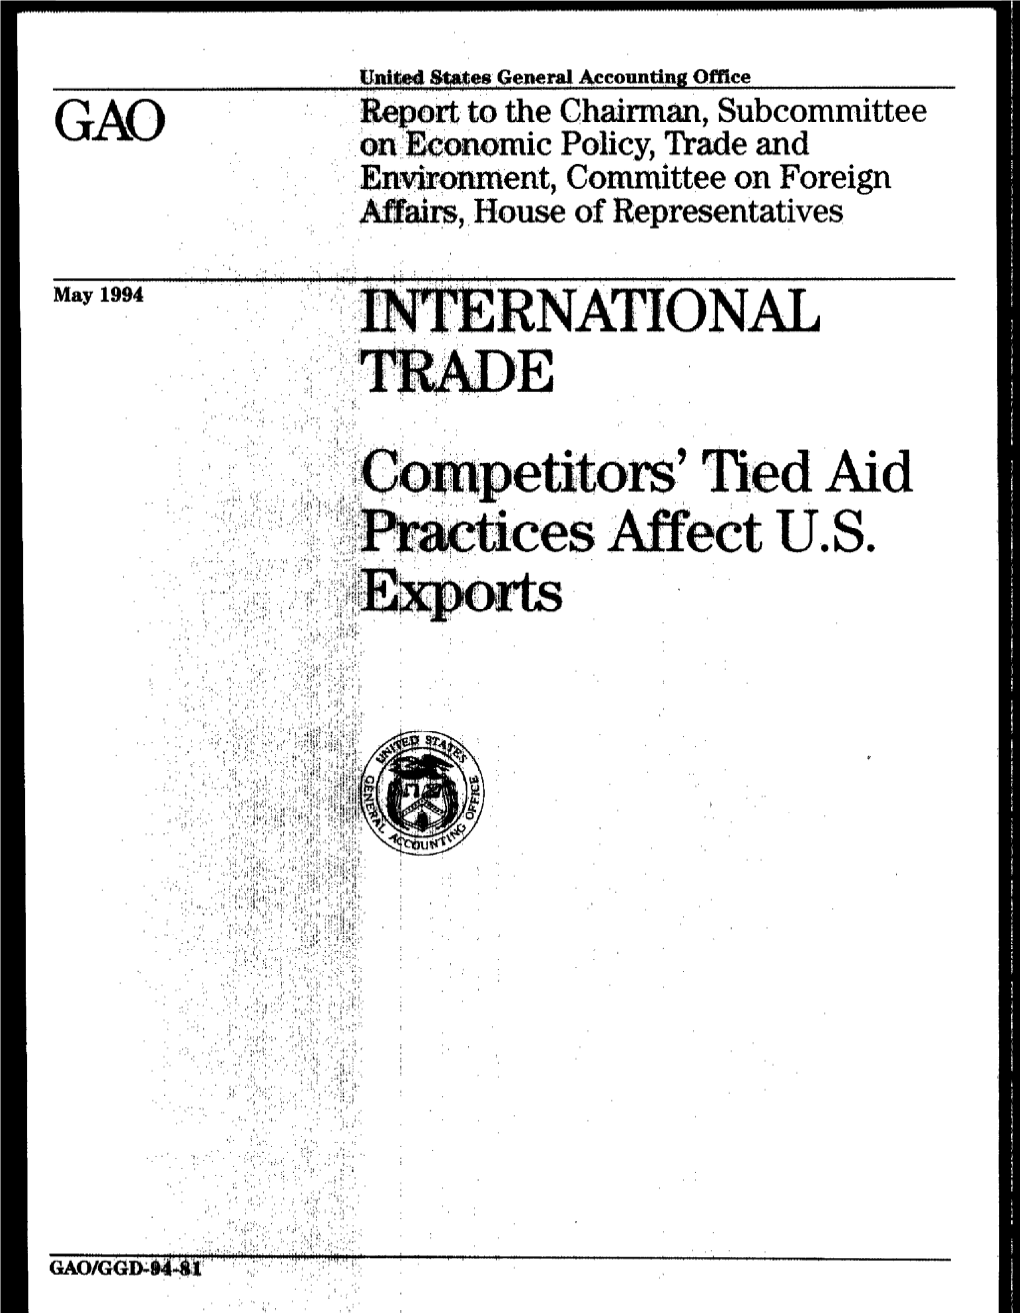 Competitors' Tied Aid Practices Affect US Exports